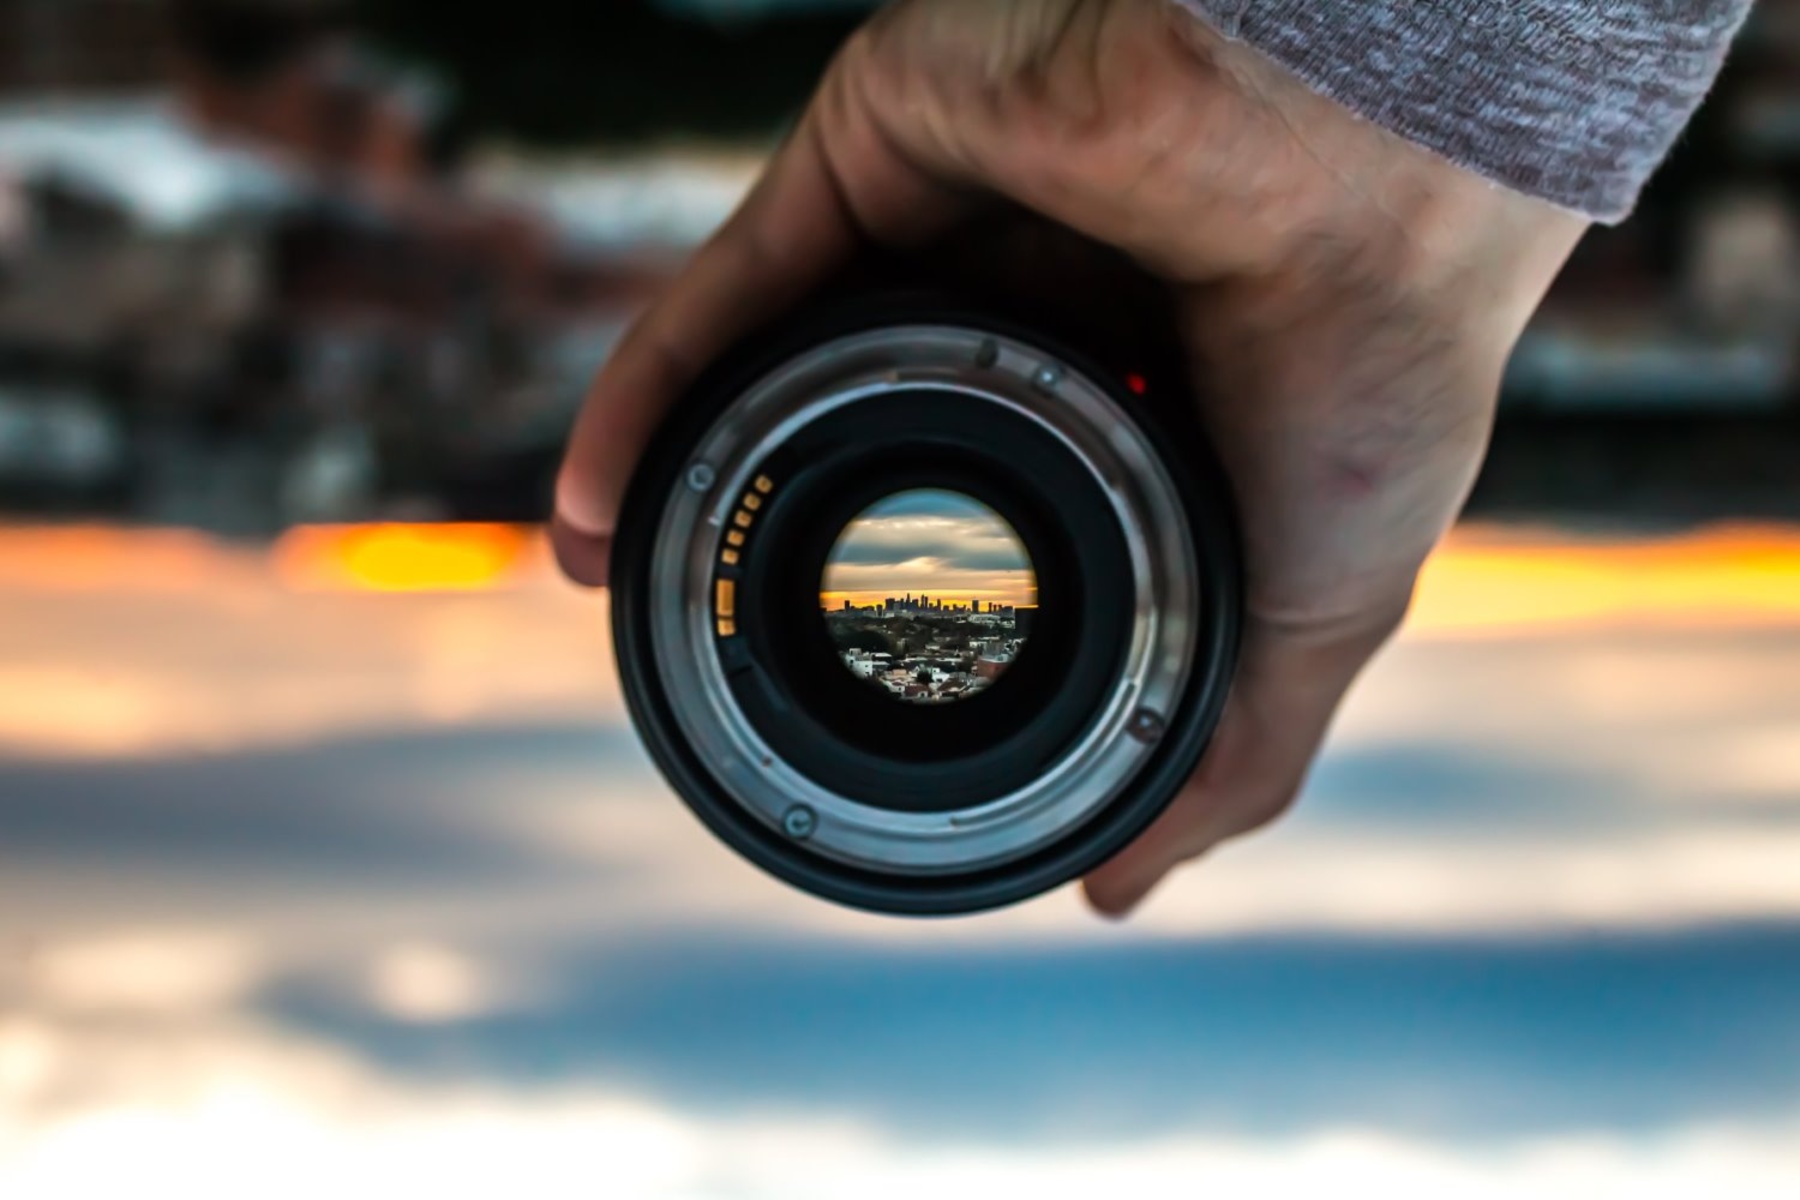 What Is The Largest Focal Length For A Mirrorless Camera Lens